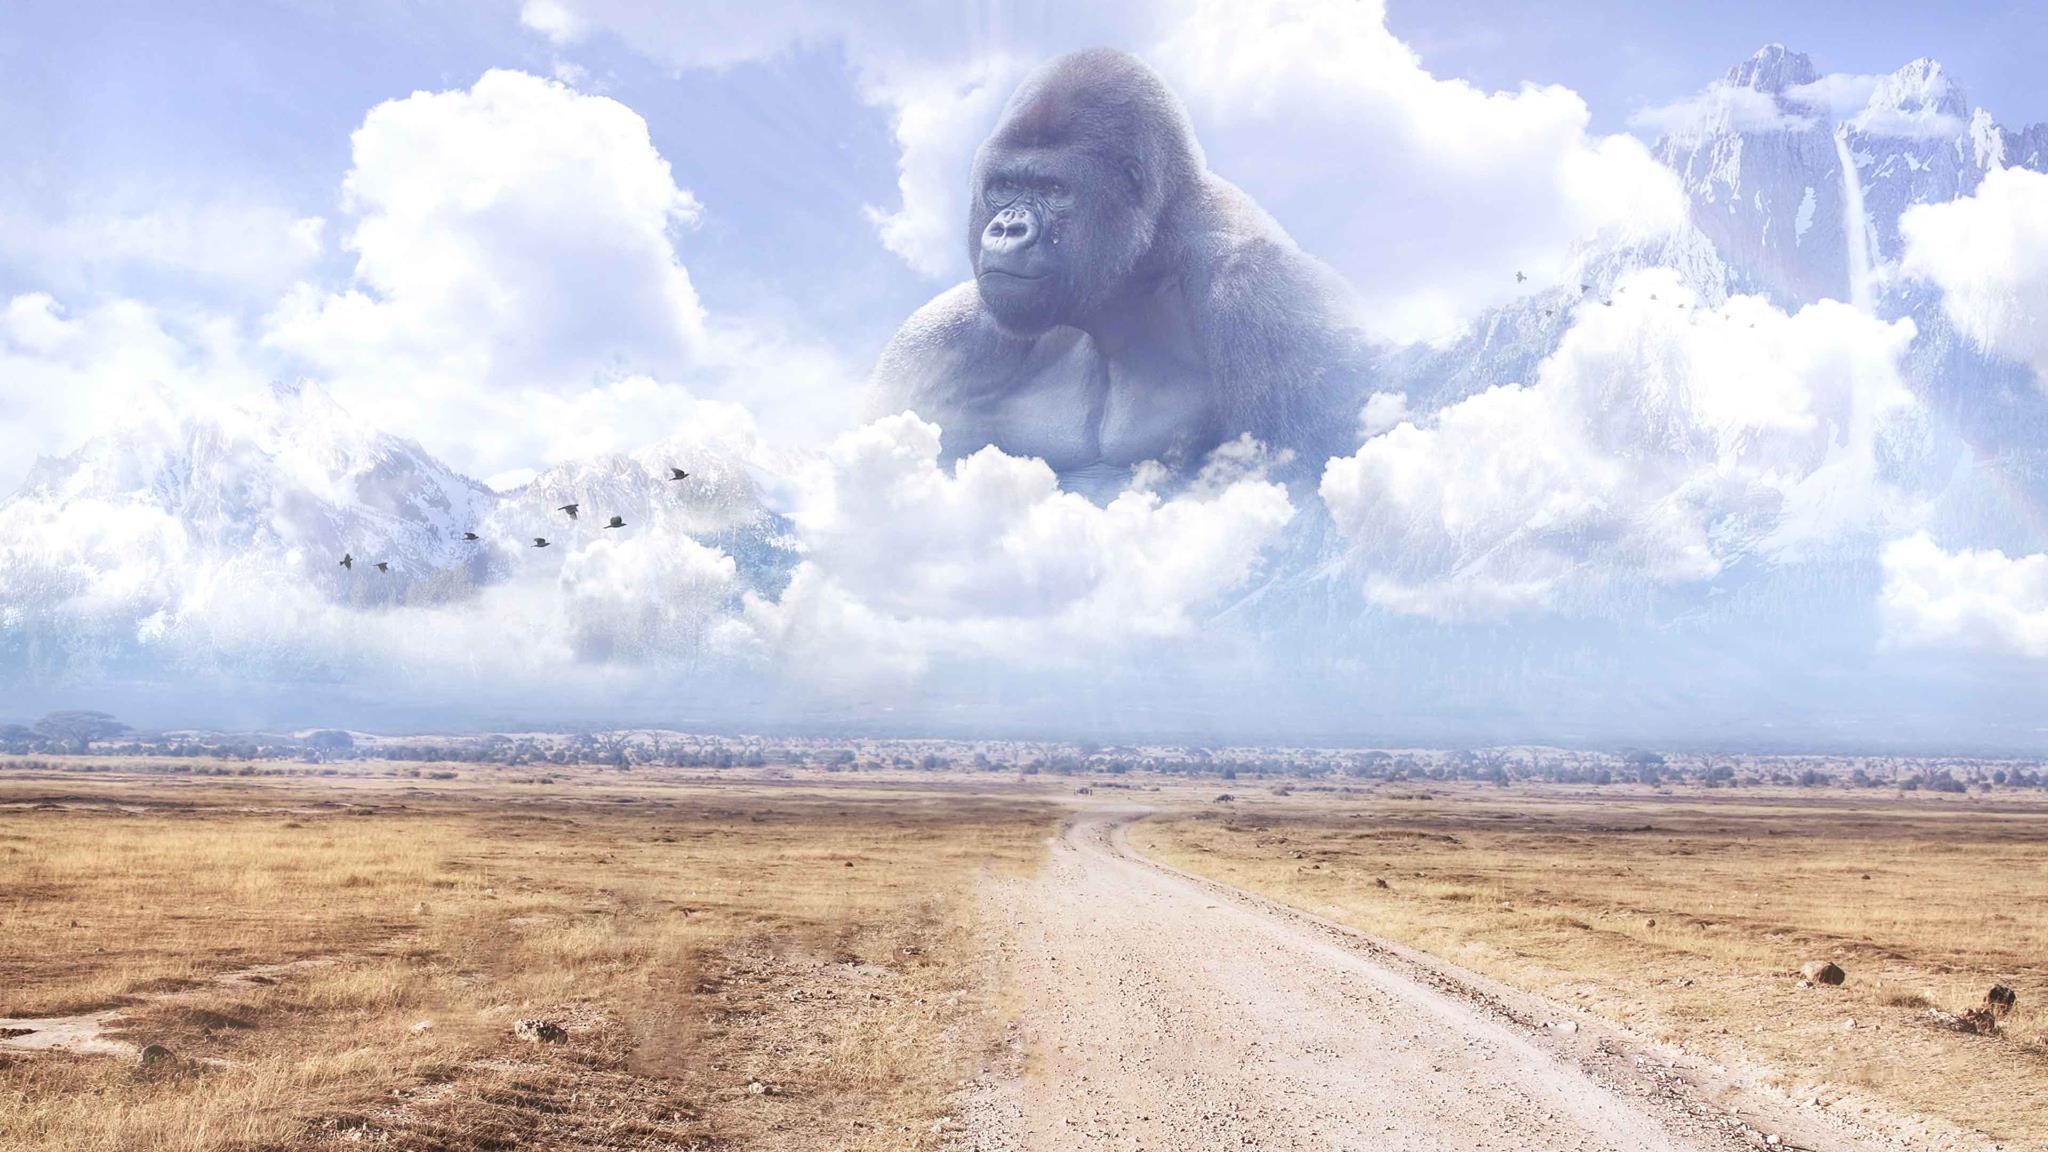 Thought of this when I saw the harambe wallpaper